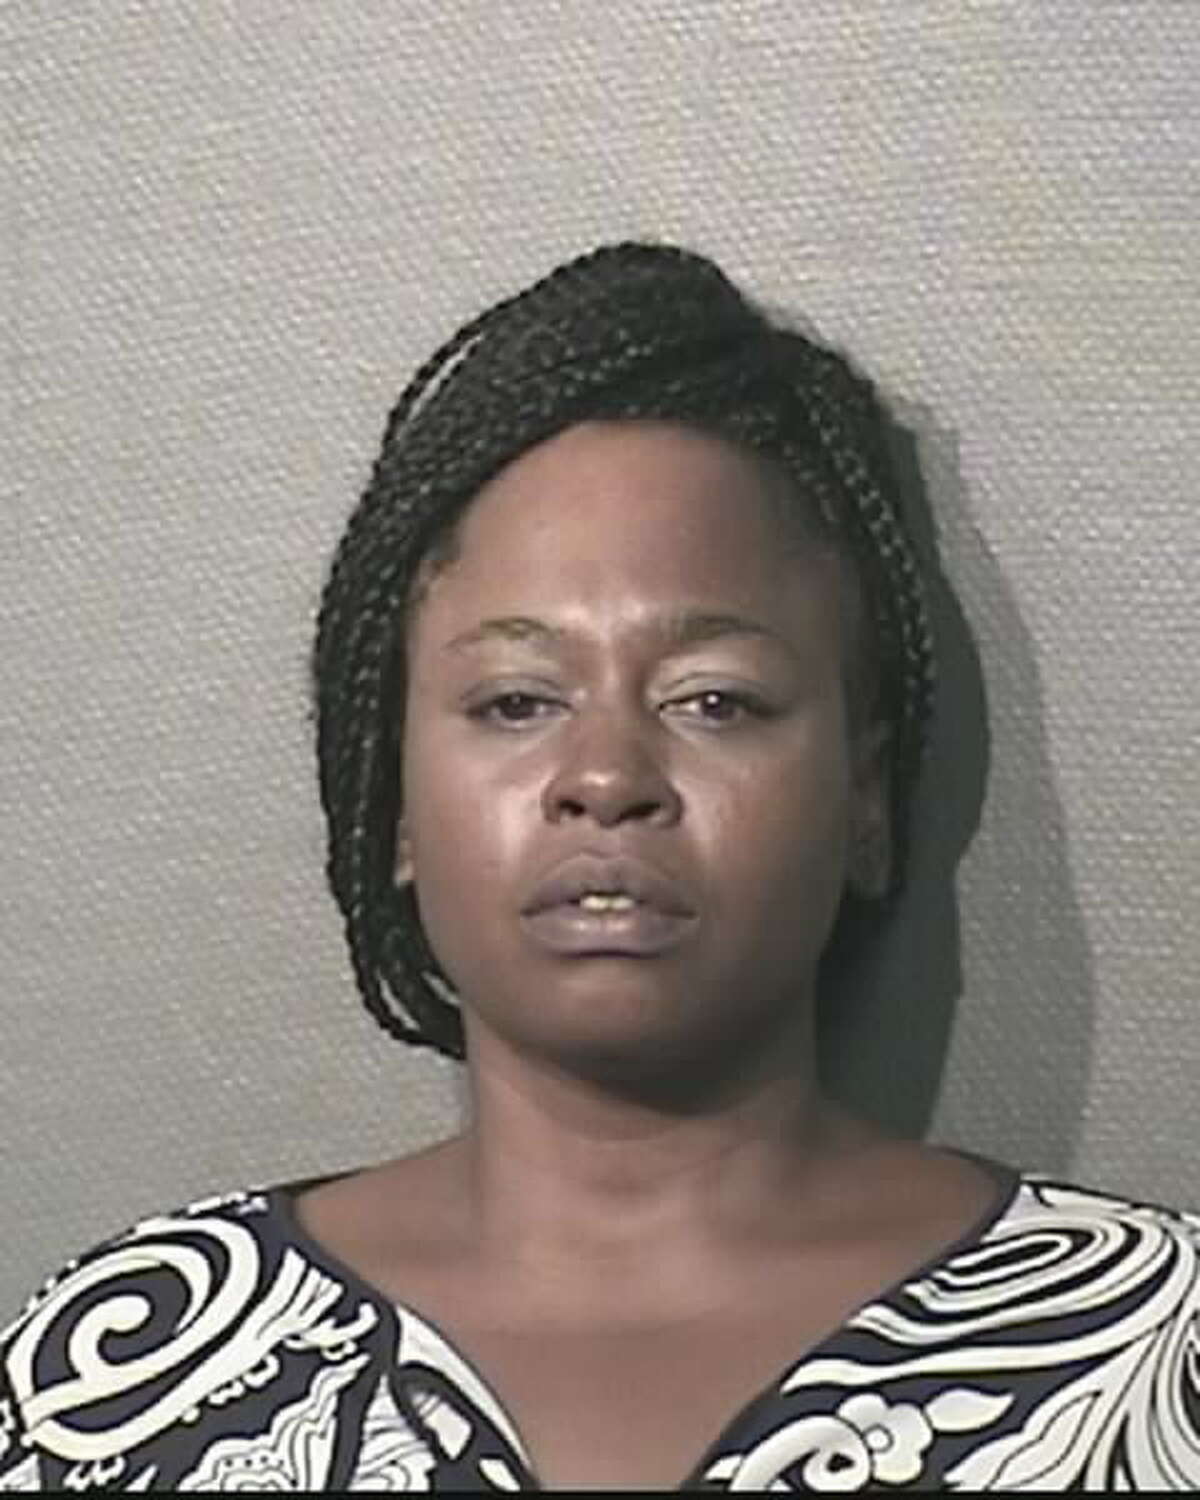 Tina Carr, 46, is charged with injury to a child by omission.